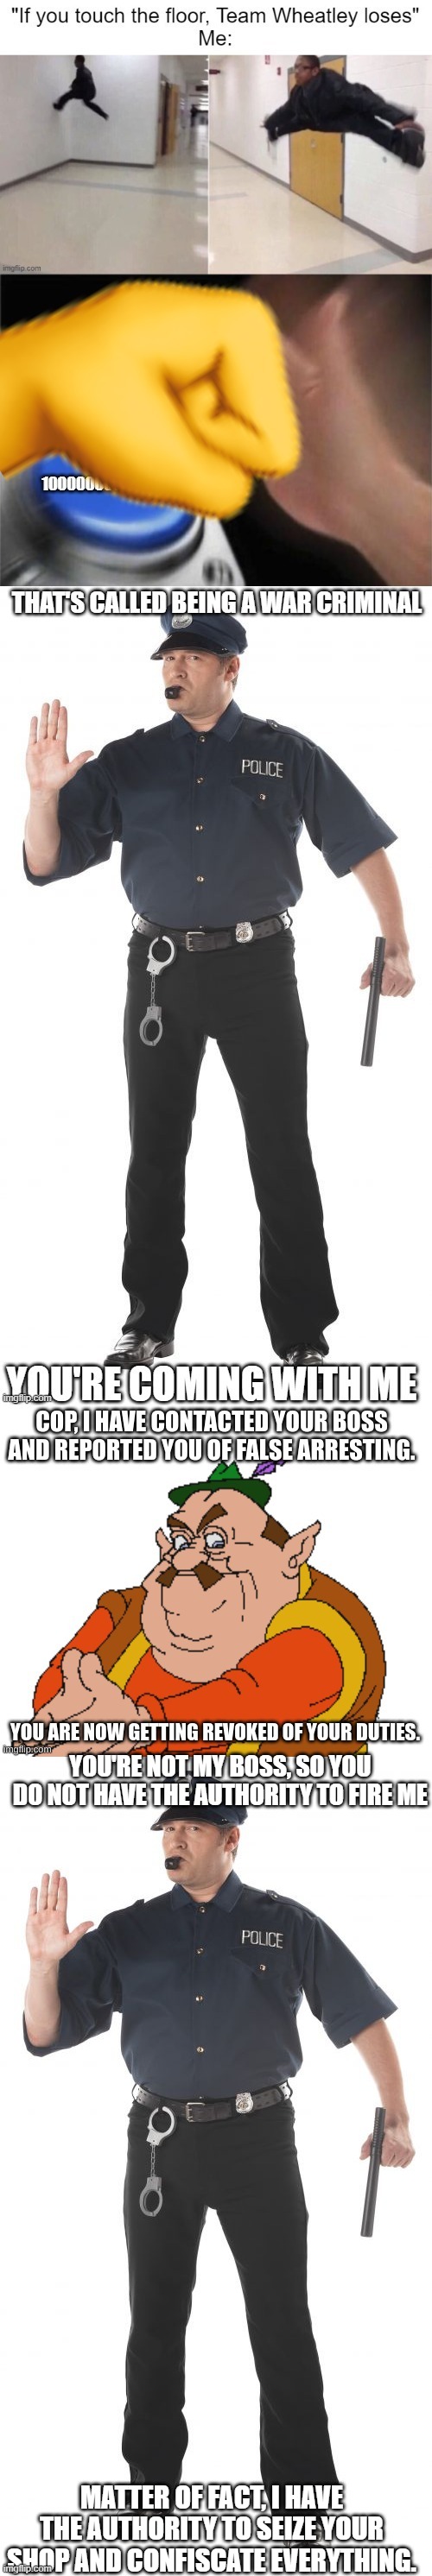 YOU'RE NOT MY BOSS, SO YOU DO NOT HAVE THE AUTHORITY TO FIRE ME; MATTER OF FACT, I HAVE THE AUTHORITY TO SEIZE YOUR SHOP AND CONFISCATE EVERYTHING. | image tagged in memes,stop cop | made w/ Imgflip meme maker